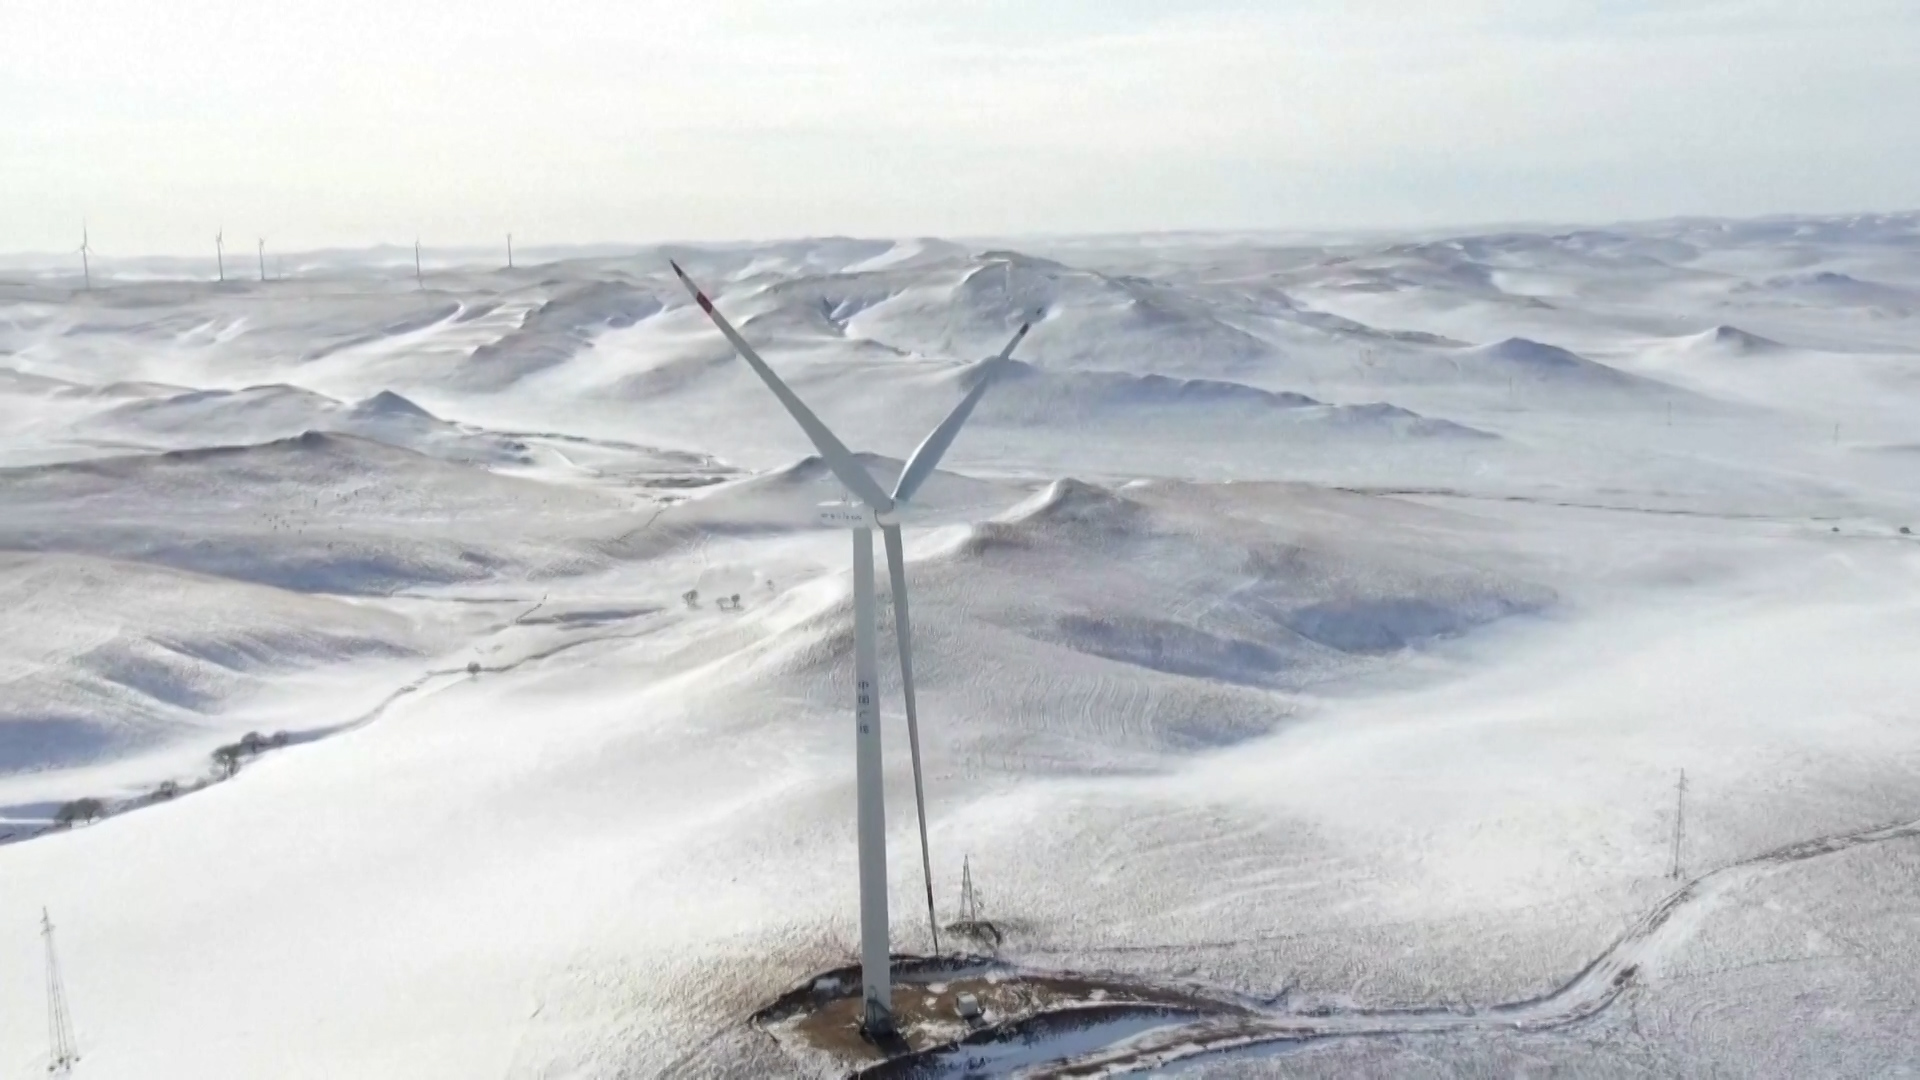 China's biggest onshore wind power project, operated by the state-owned China General Nuclear Power Corporation, is now fully operational in Inner Mongolia. With 701 wind turbines boasting a total installed capacity of 3 million kilowatts, the facility aims to produce 10 billion kilowatt-hours annually, significantly cutting standard coal consumption by 2.96 million tons and reducing carbon dioxide emissions by 8.02 million tons.